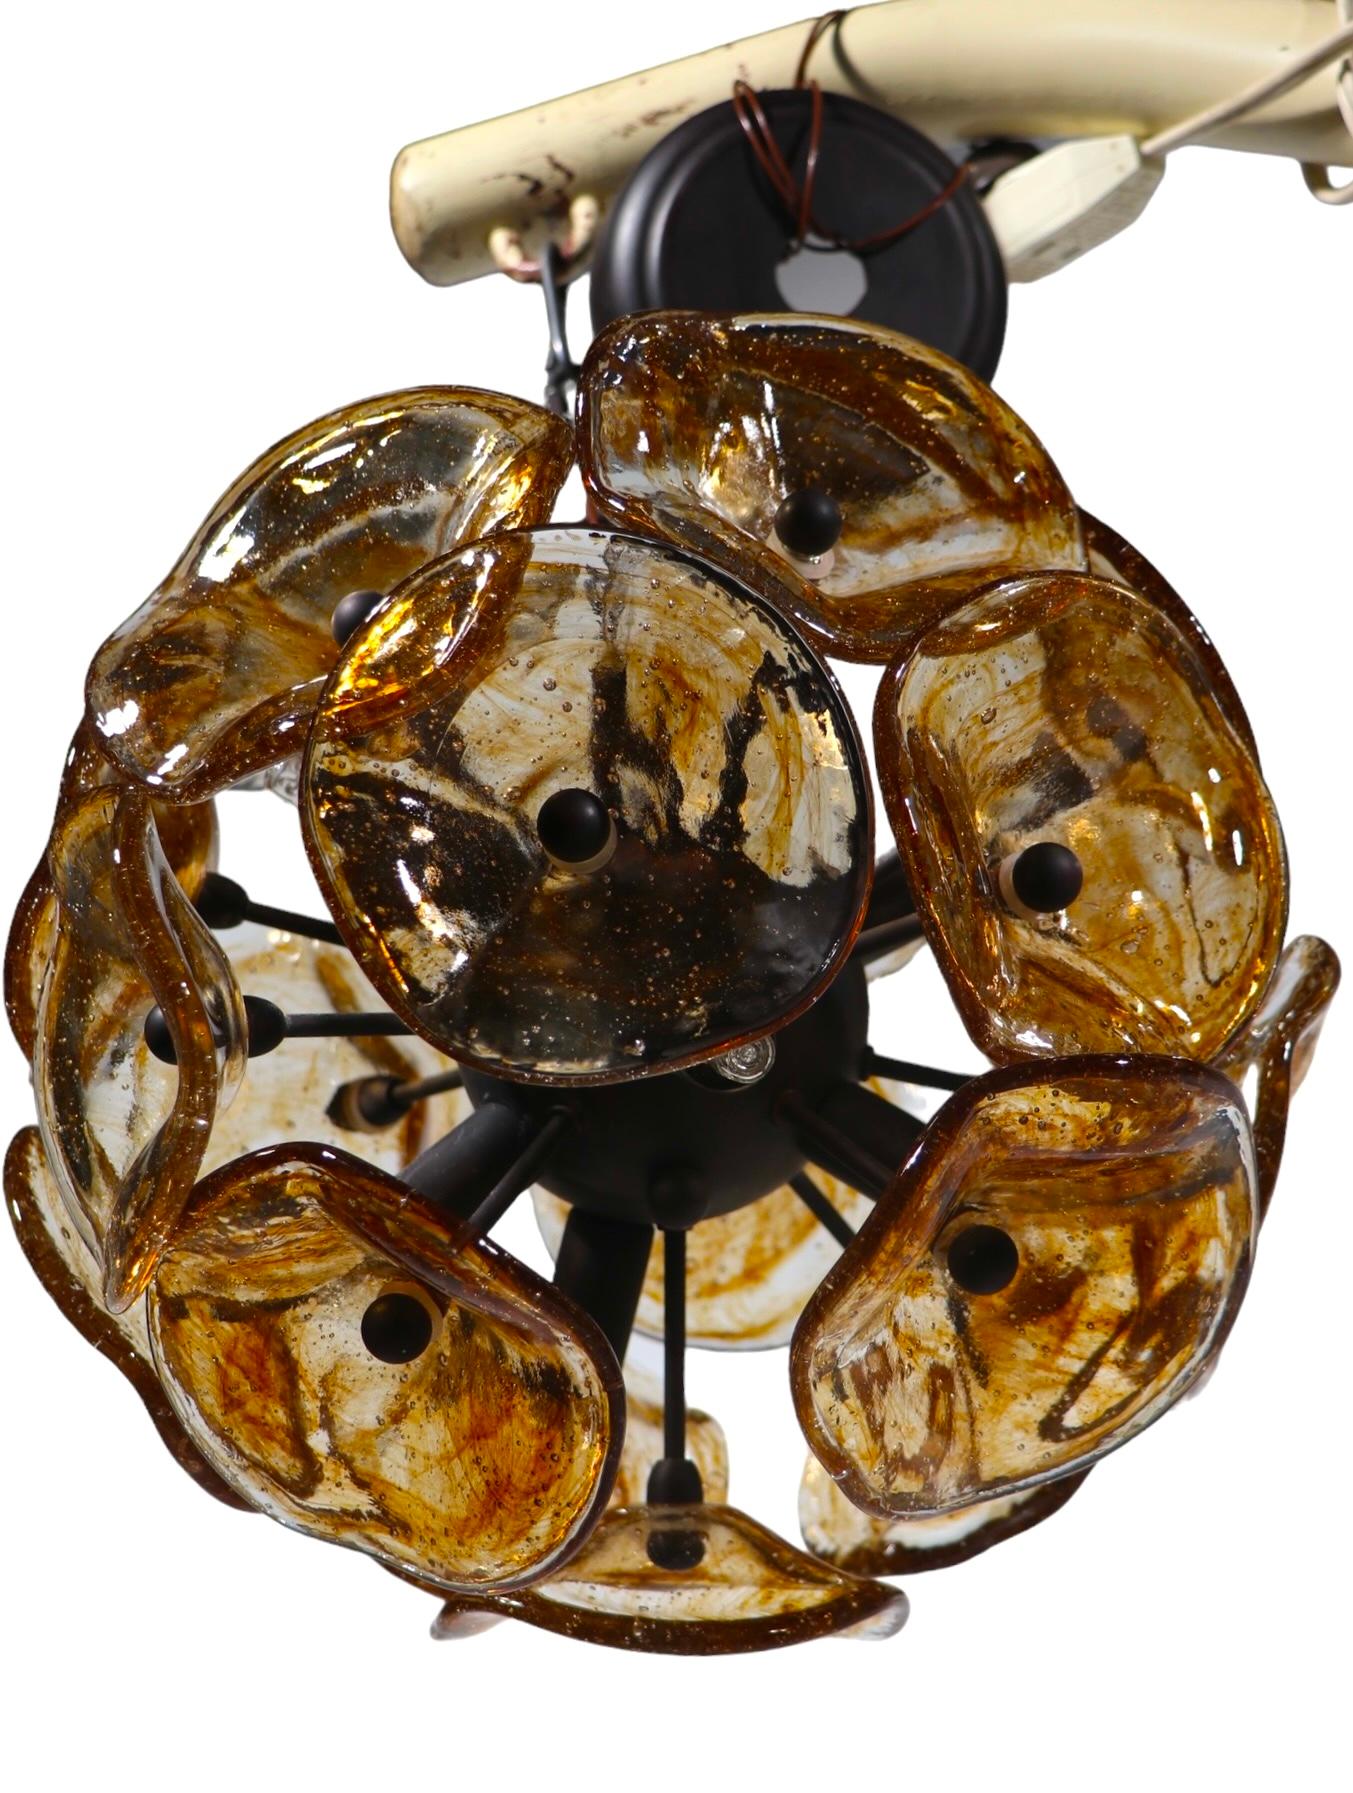 Post Modern Chandelier with Murano Glass Flowers by Fiori c 1990 -2010 For Sale 3